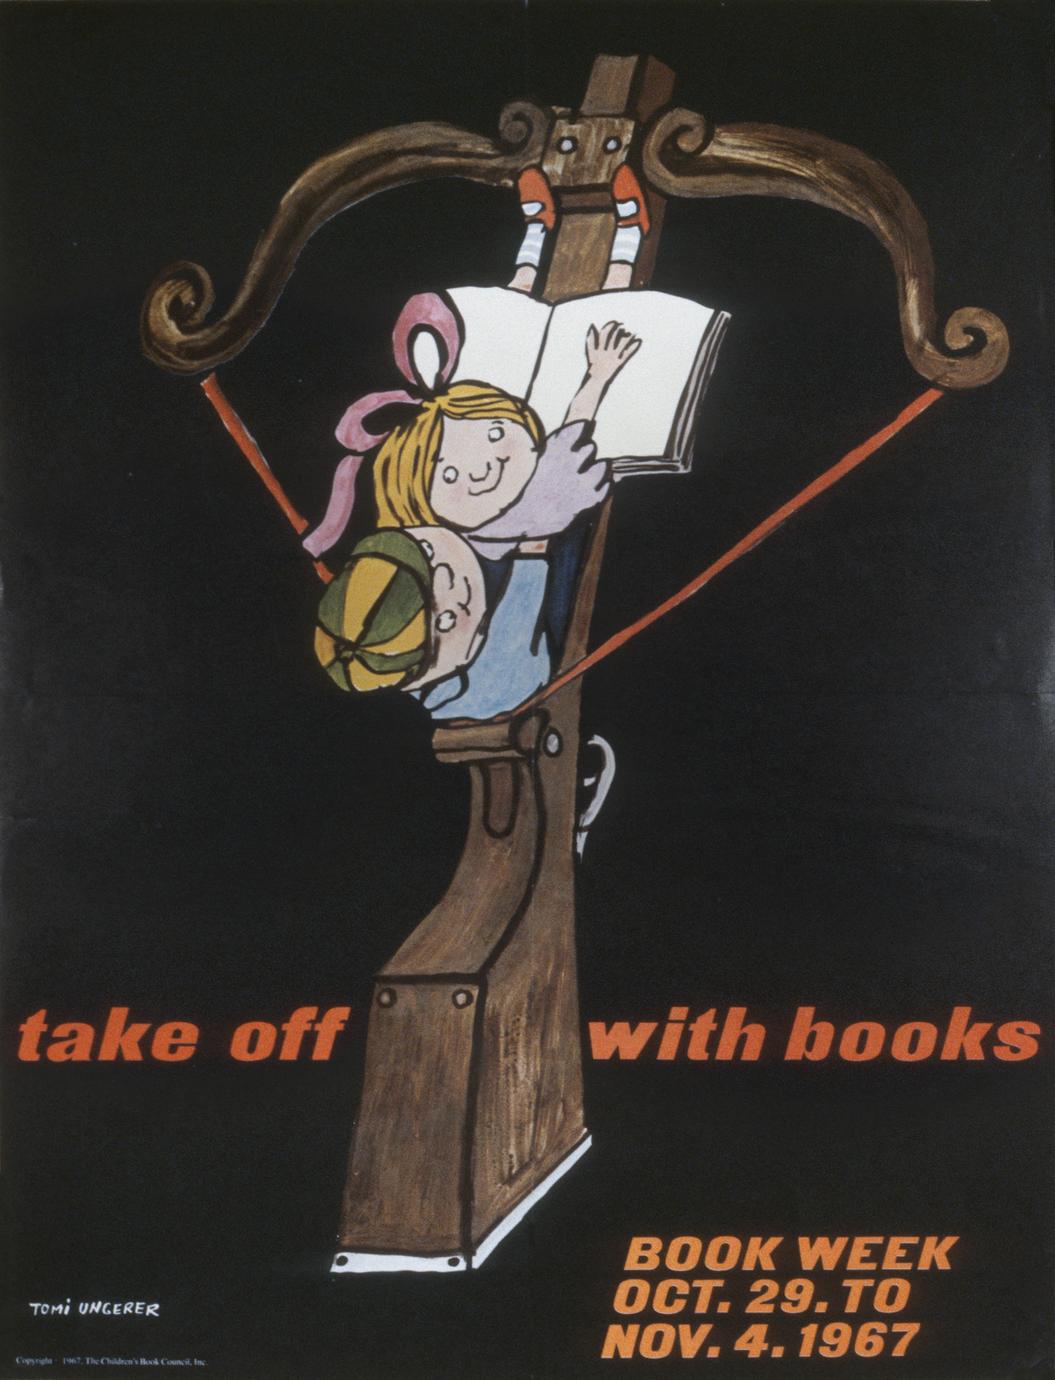 Take off with books